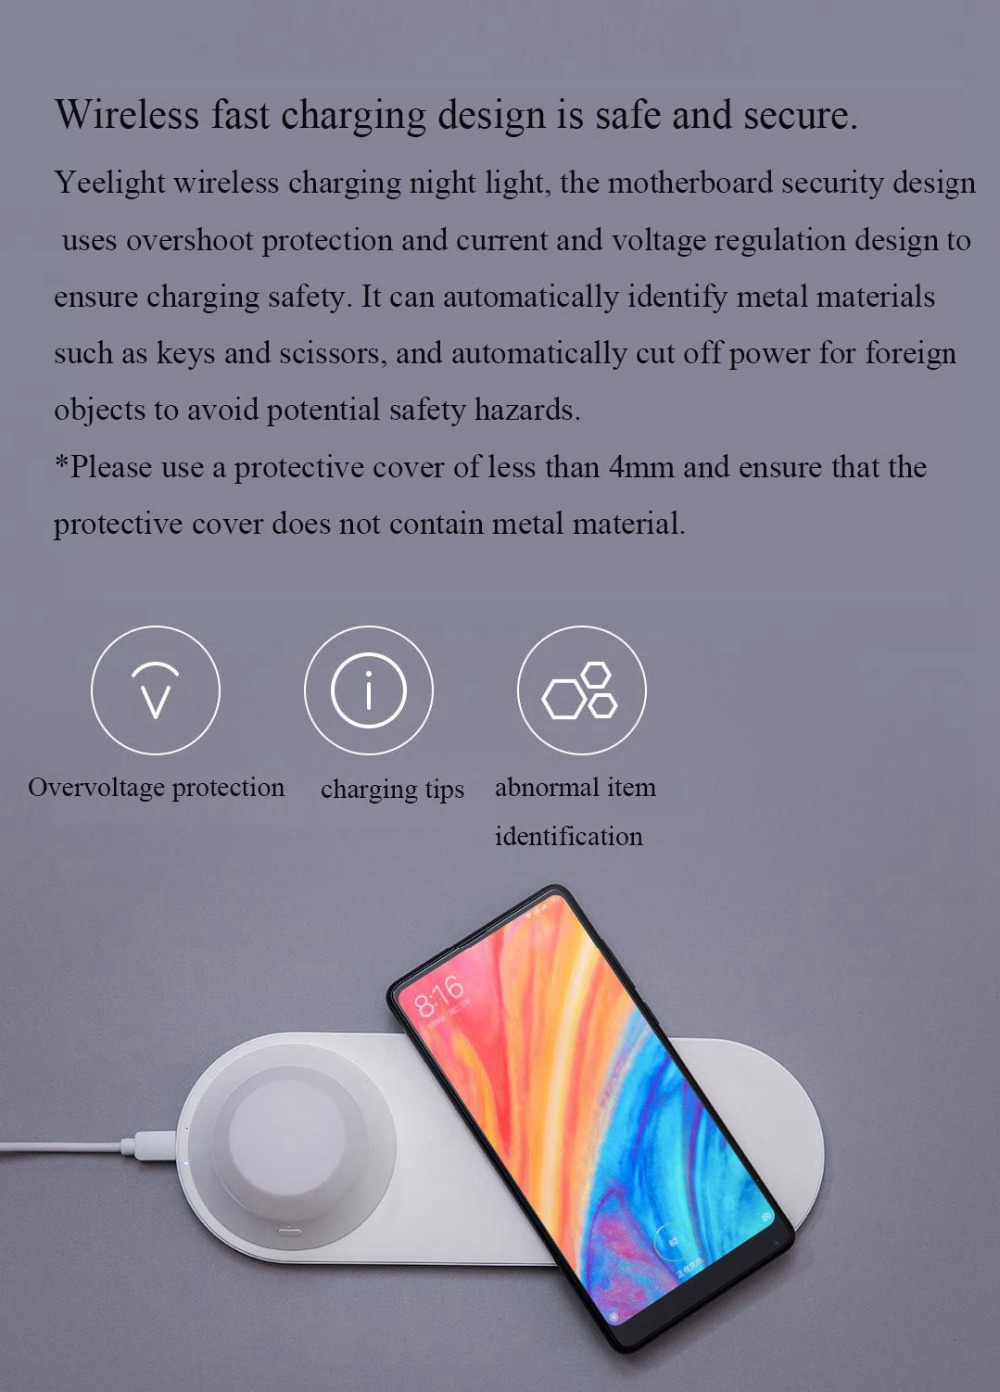 Yeelight-Wireless-Charger-with-LED-Night-Light-Magnetic-Attraction-Fast-Charging-For-iPhone--Ecosyst-1414272-4